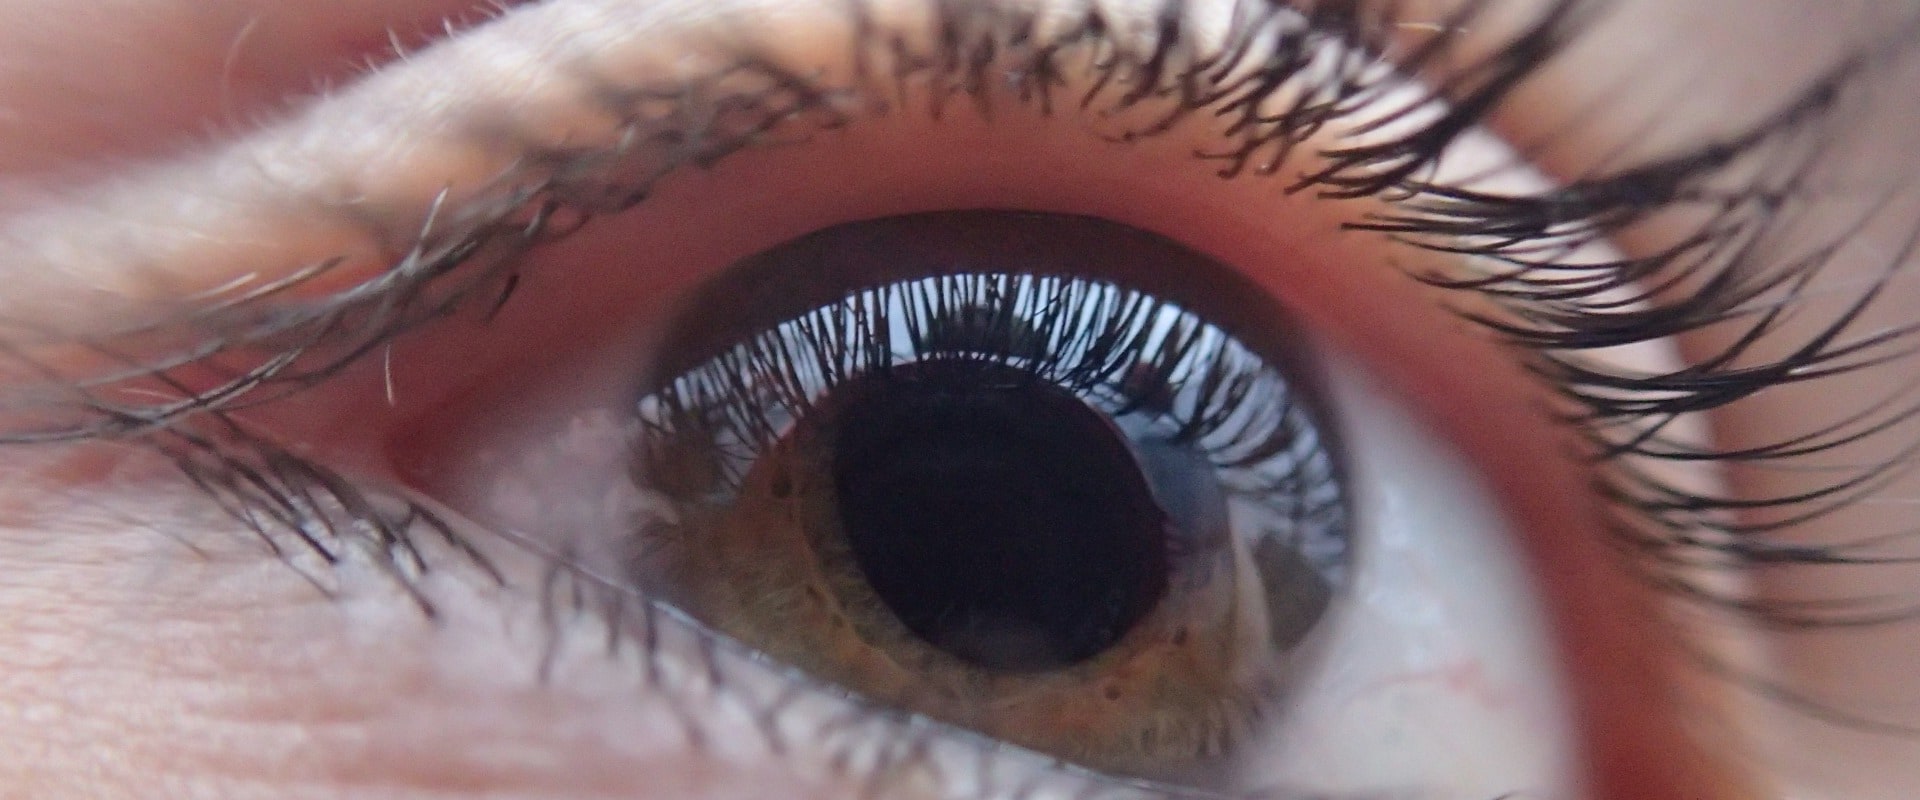 Can You See Better Immediately After Cataract Surgery?